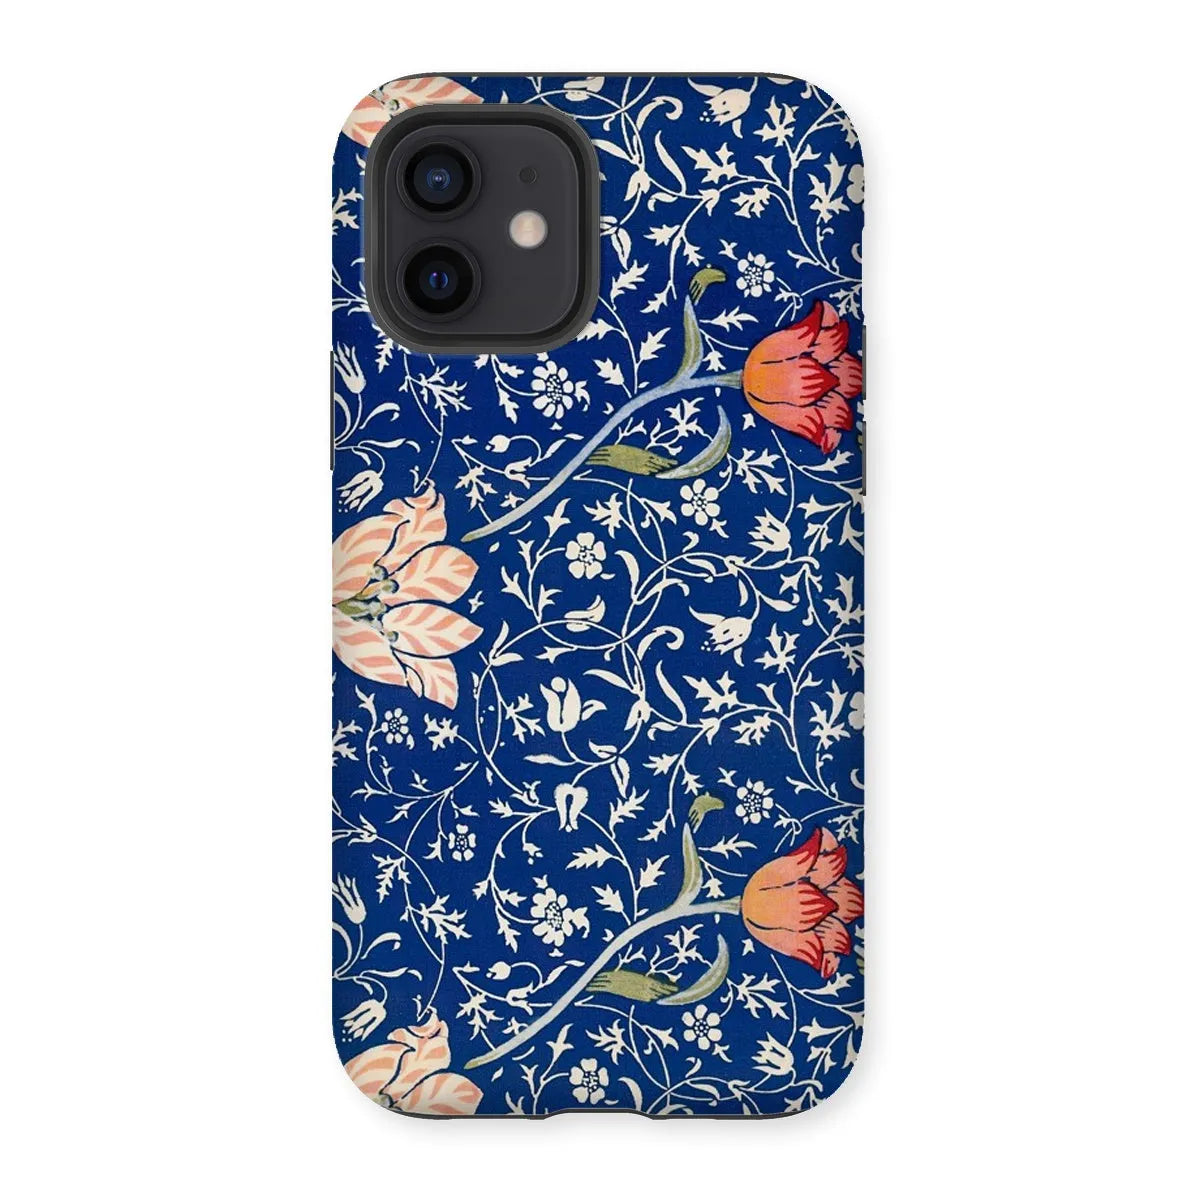 Medway - Floral Aesthetic Art Phone Case - William Morris - Iphone 12 / Matte - Mobile Phone Cases - Aesthetic Art